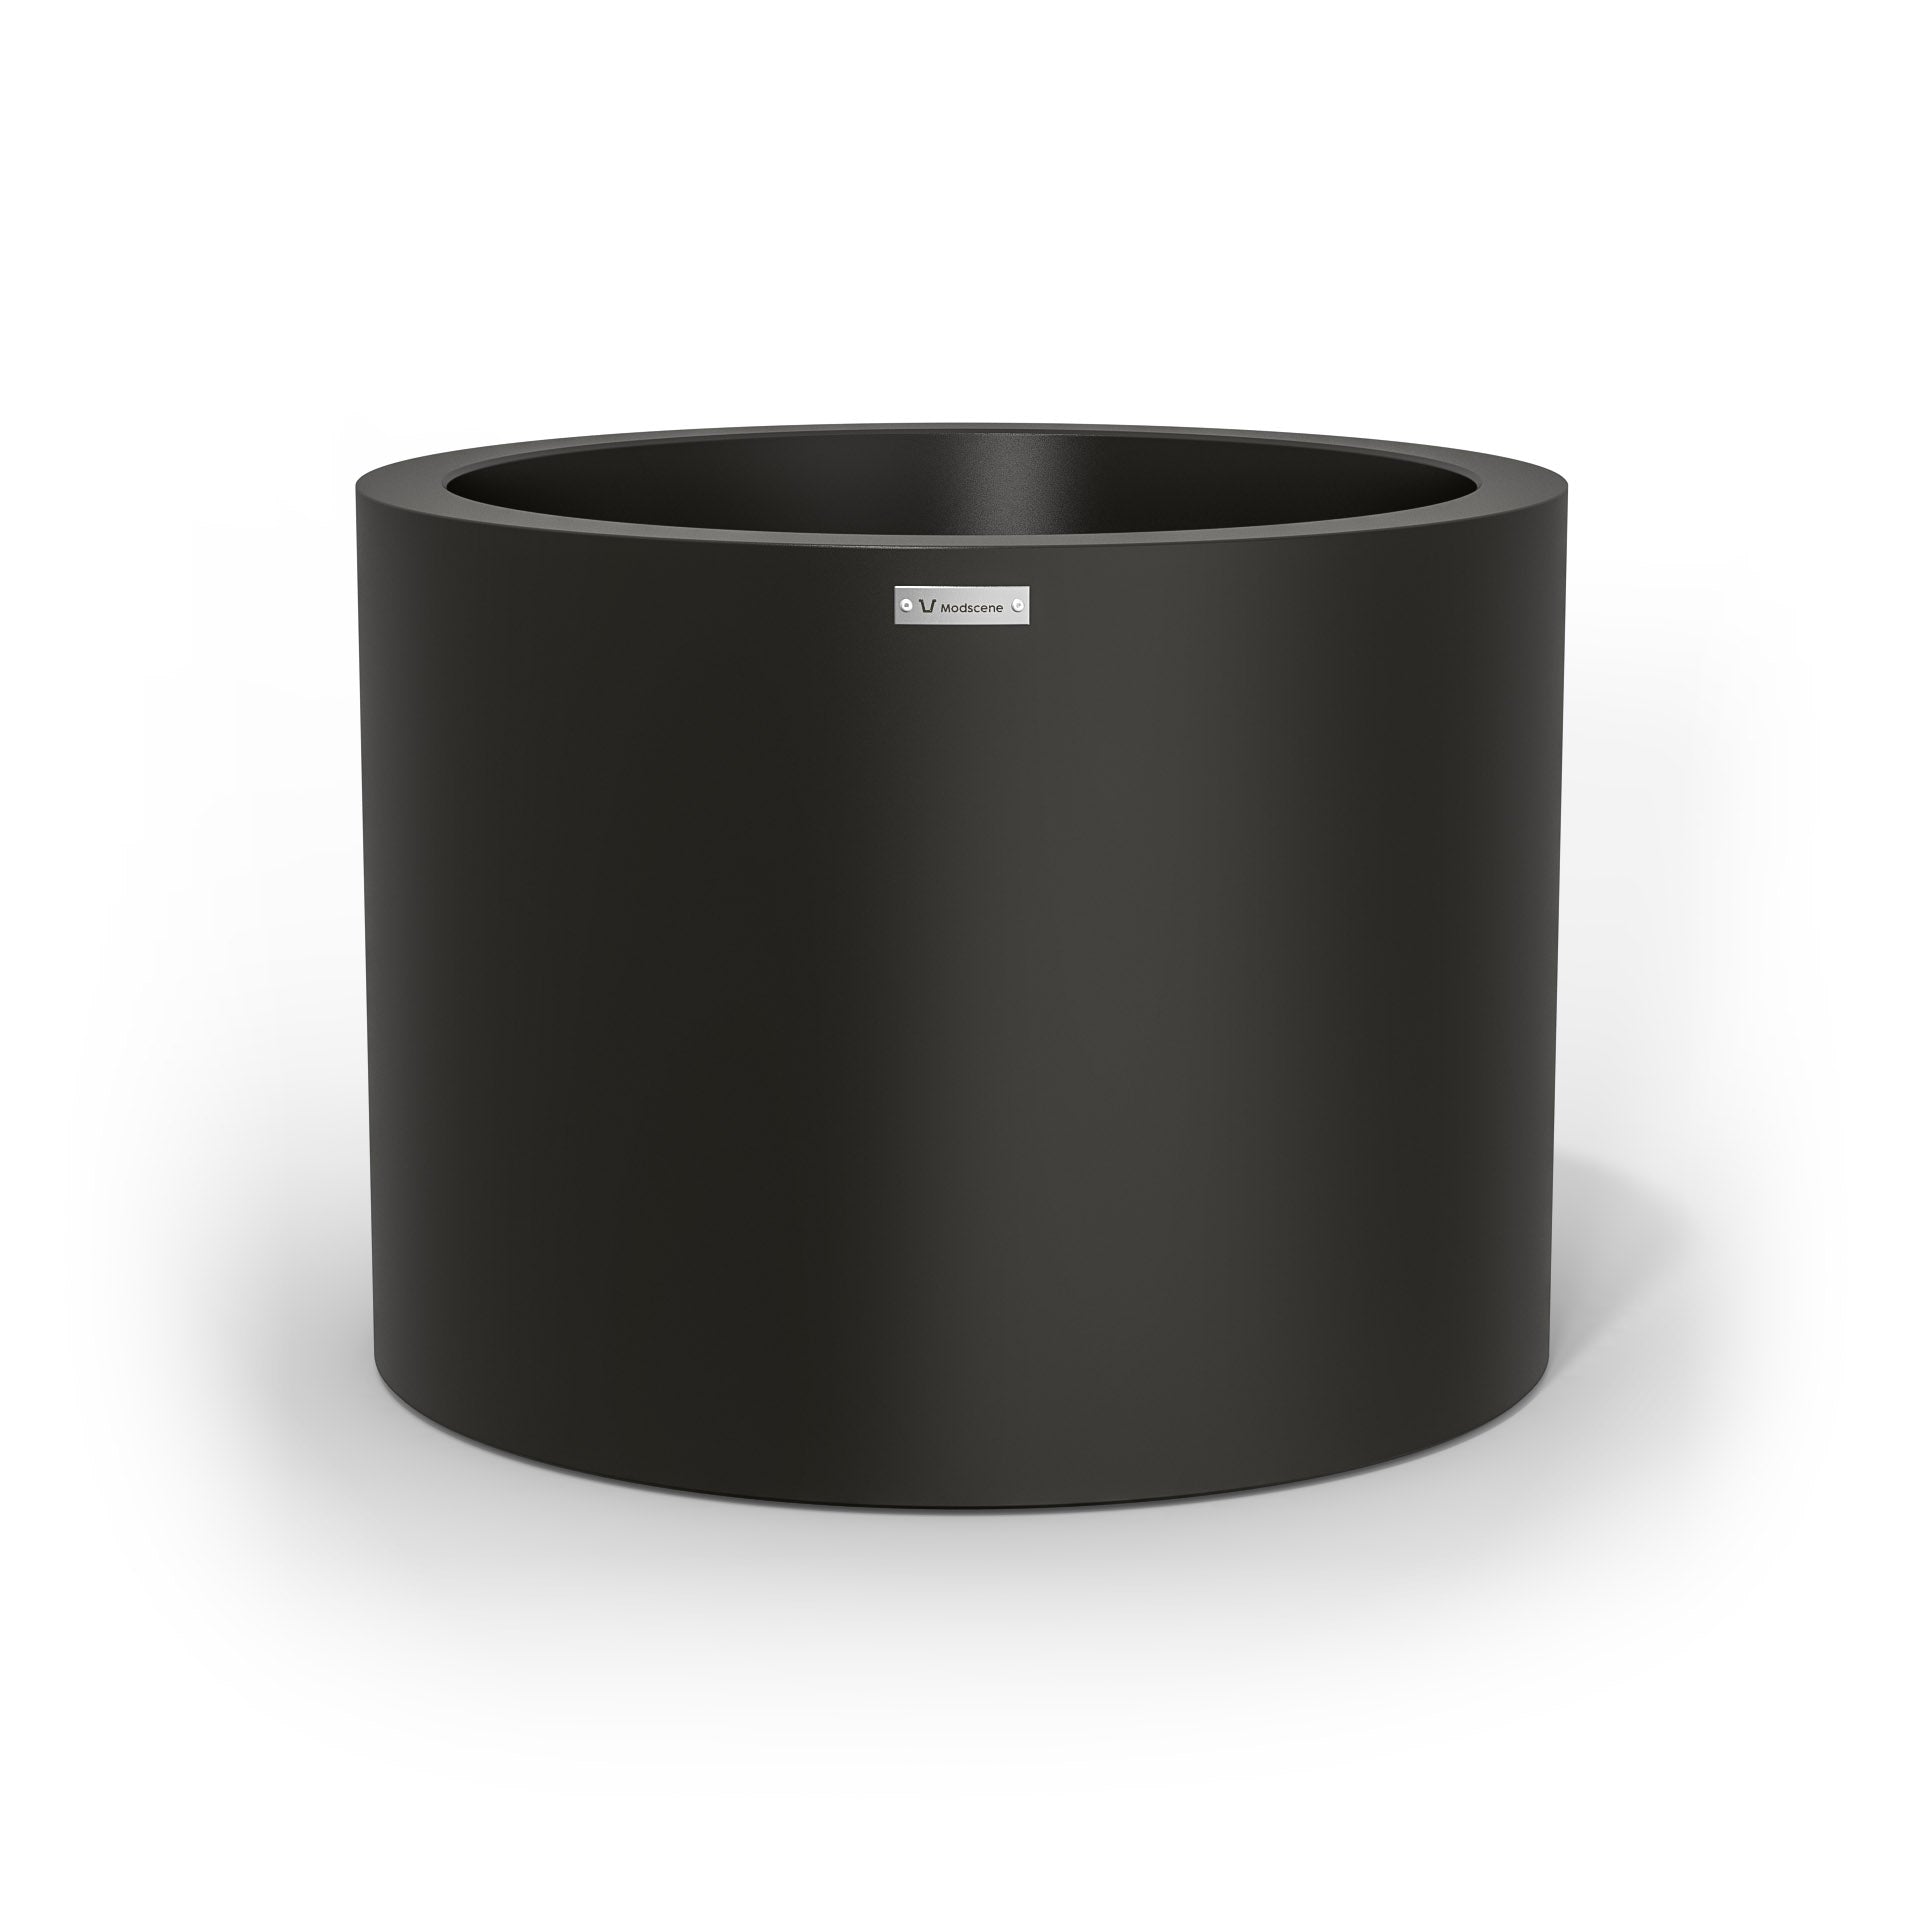 A cylinder shaped pot planter in black made by Modscene New Zealand. 